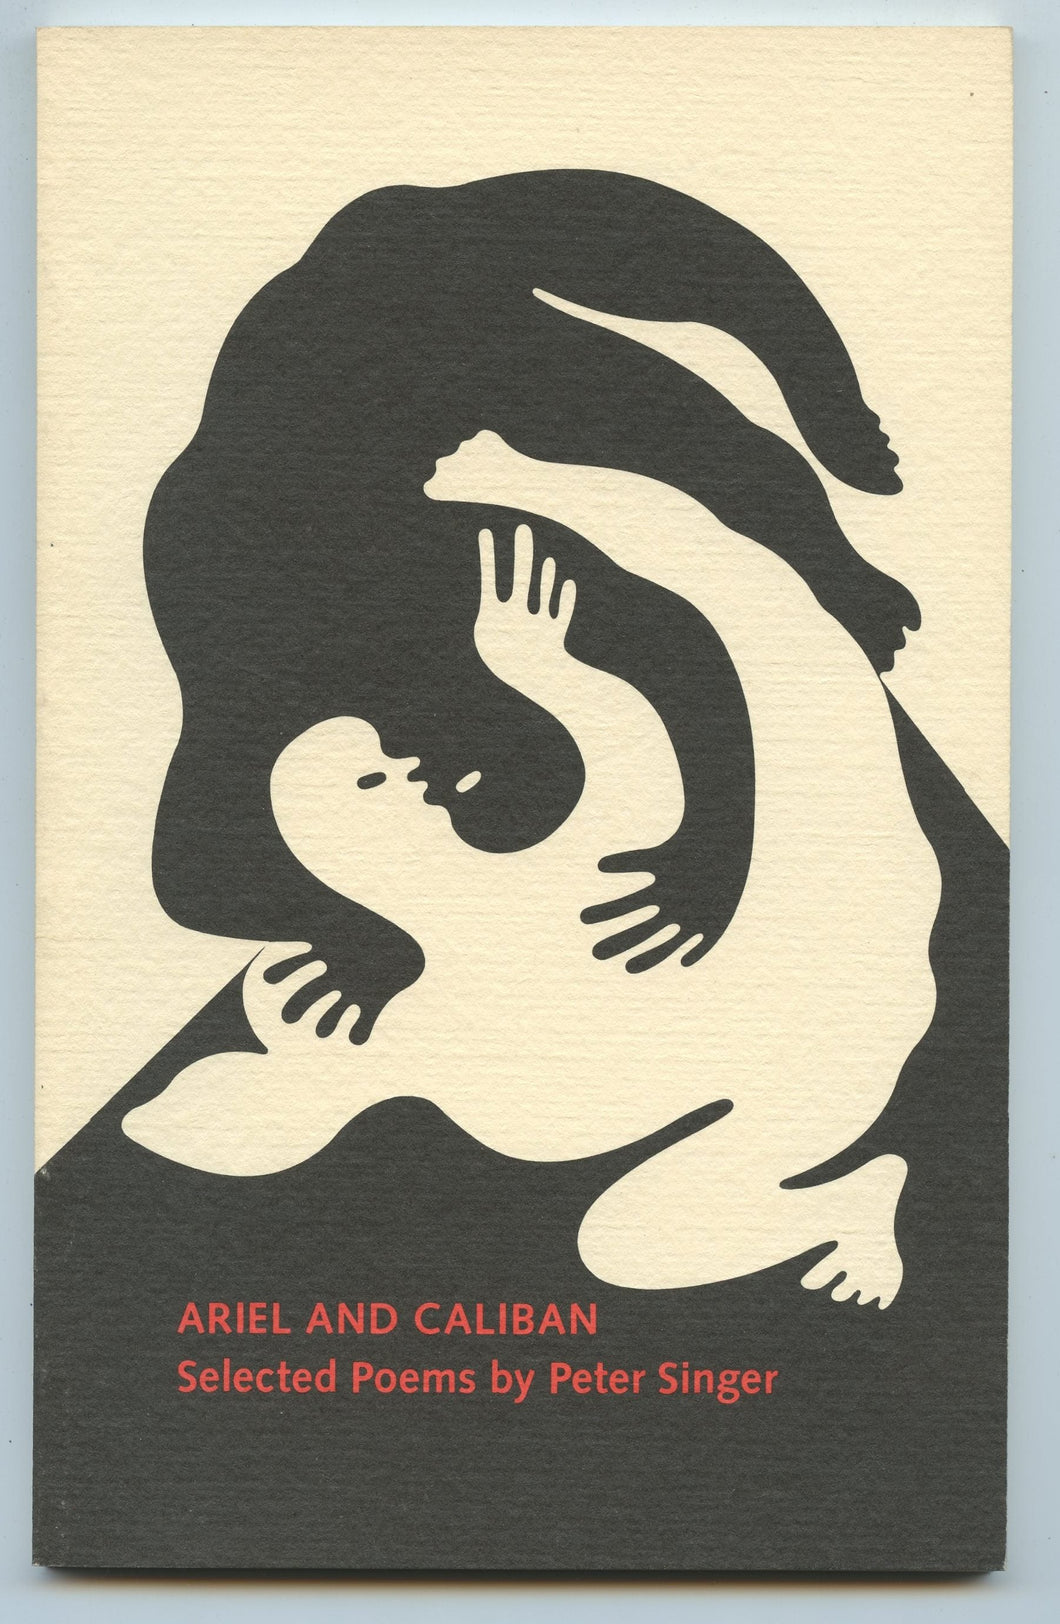 Ariel and Caliban: Selected Poems